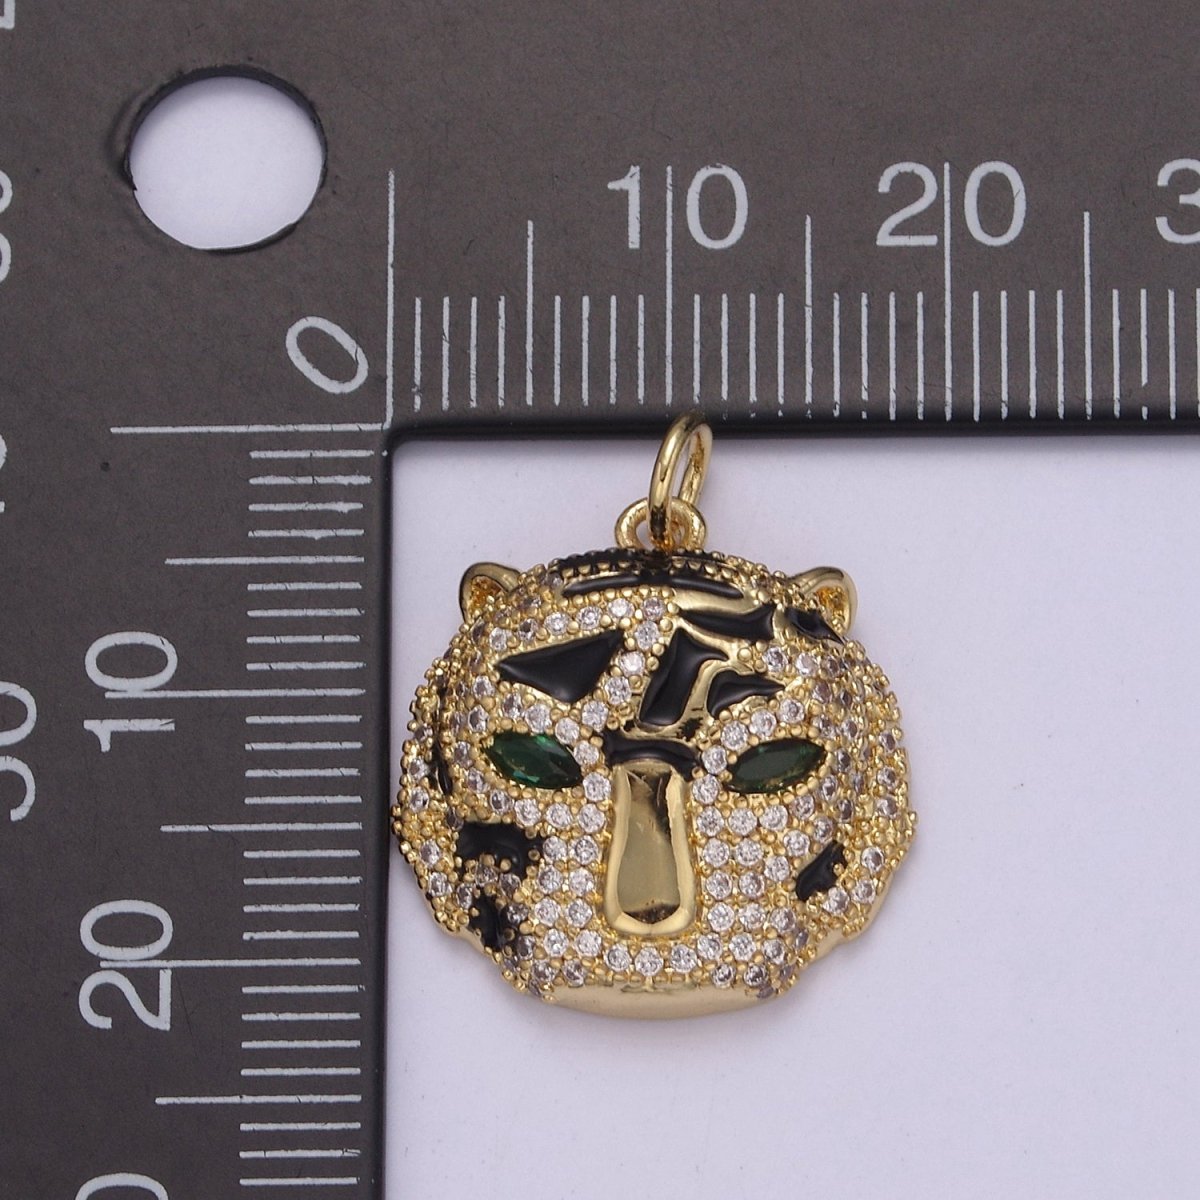 14k Gold Filled Panther Pendant Leopard Animal Head Charm DIY Necklace Bracelet Jewelry Making Supplies W-191 - DLUXCA